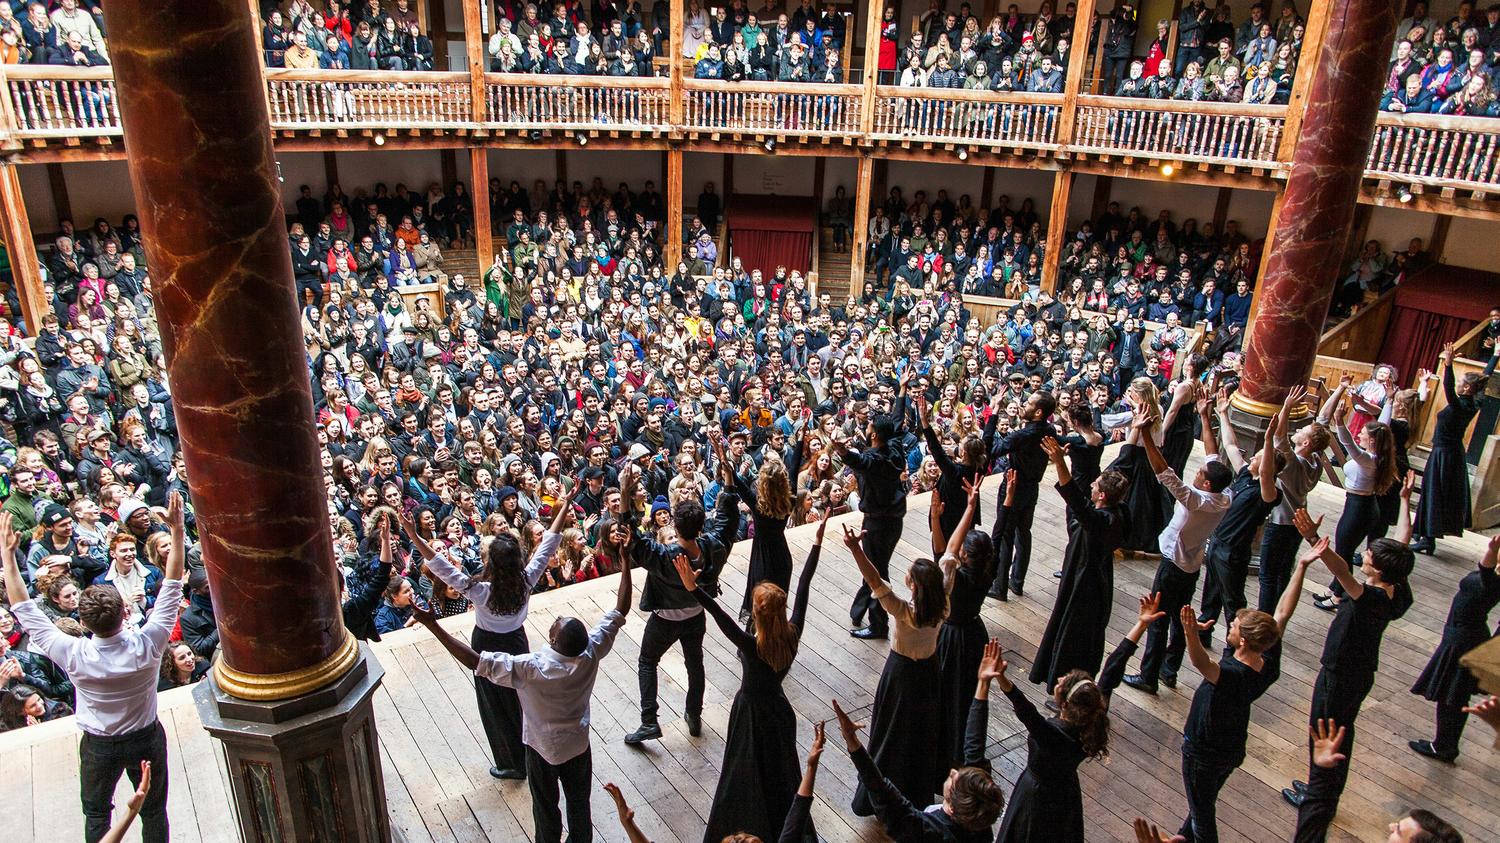 The Sam Wanamaker Festival 2015 at Shakespeare's Globe. After performing short duologues by Shakespeare and his contemporaries, the students join together for one mighty final jig. Photo by Cesare De Giglio ©